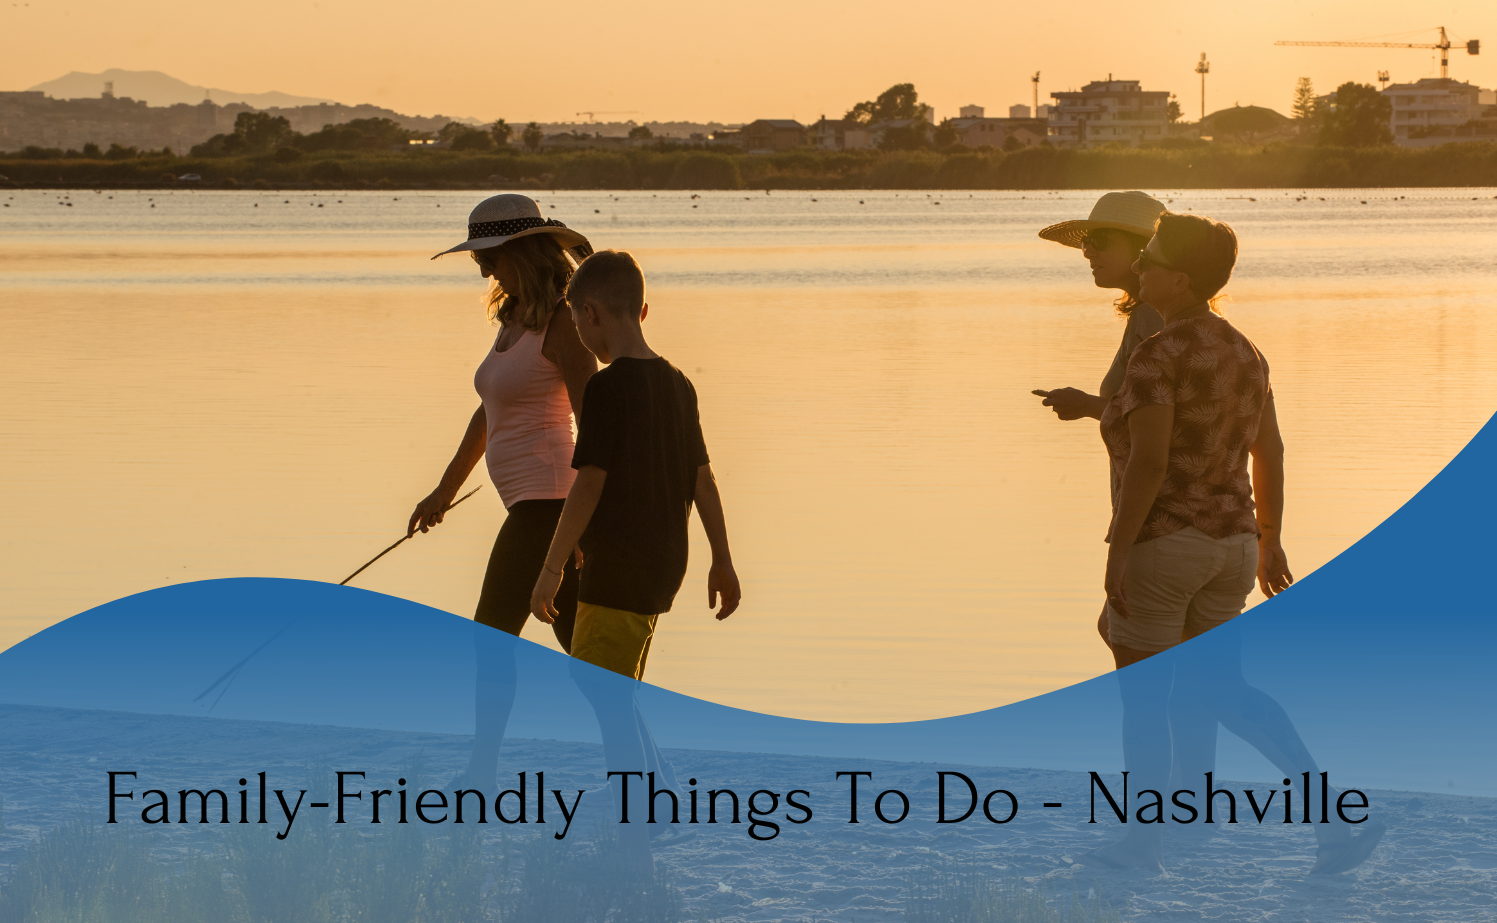 A family enjoying a tranquil walk by the lakeside at sunset, exploring the natural beauty of nashville's outdoors.